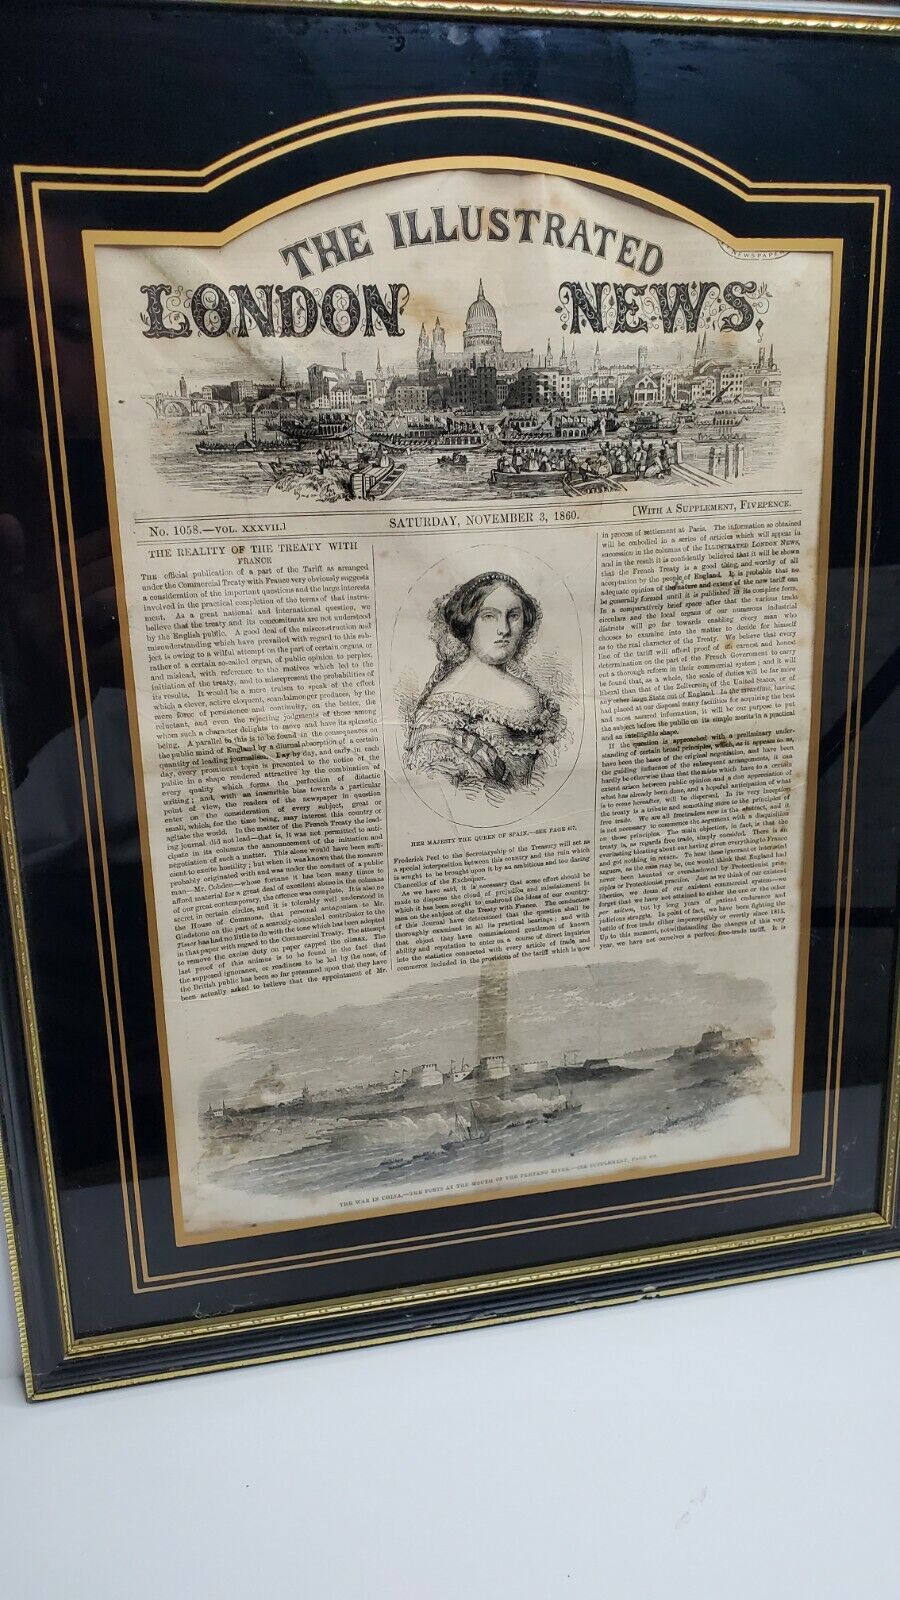 The Illustrated London Newpaper Nov, 3 1860 Framed With Authentication